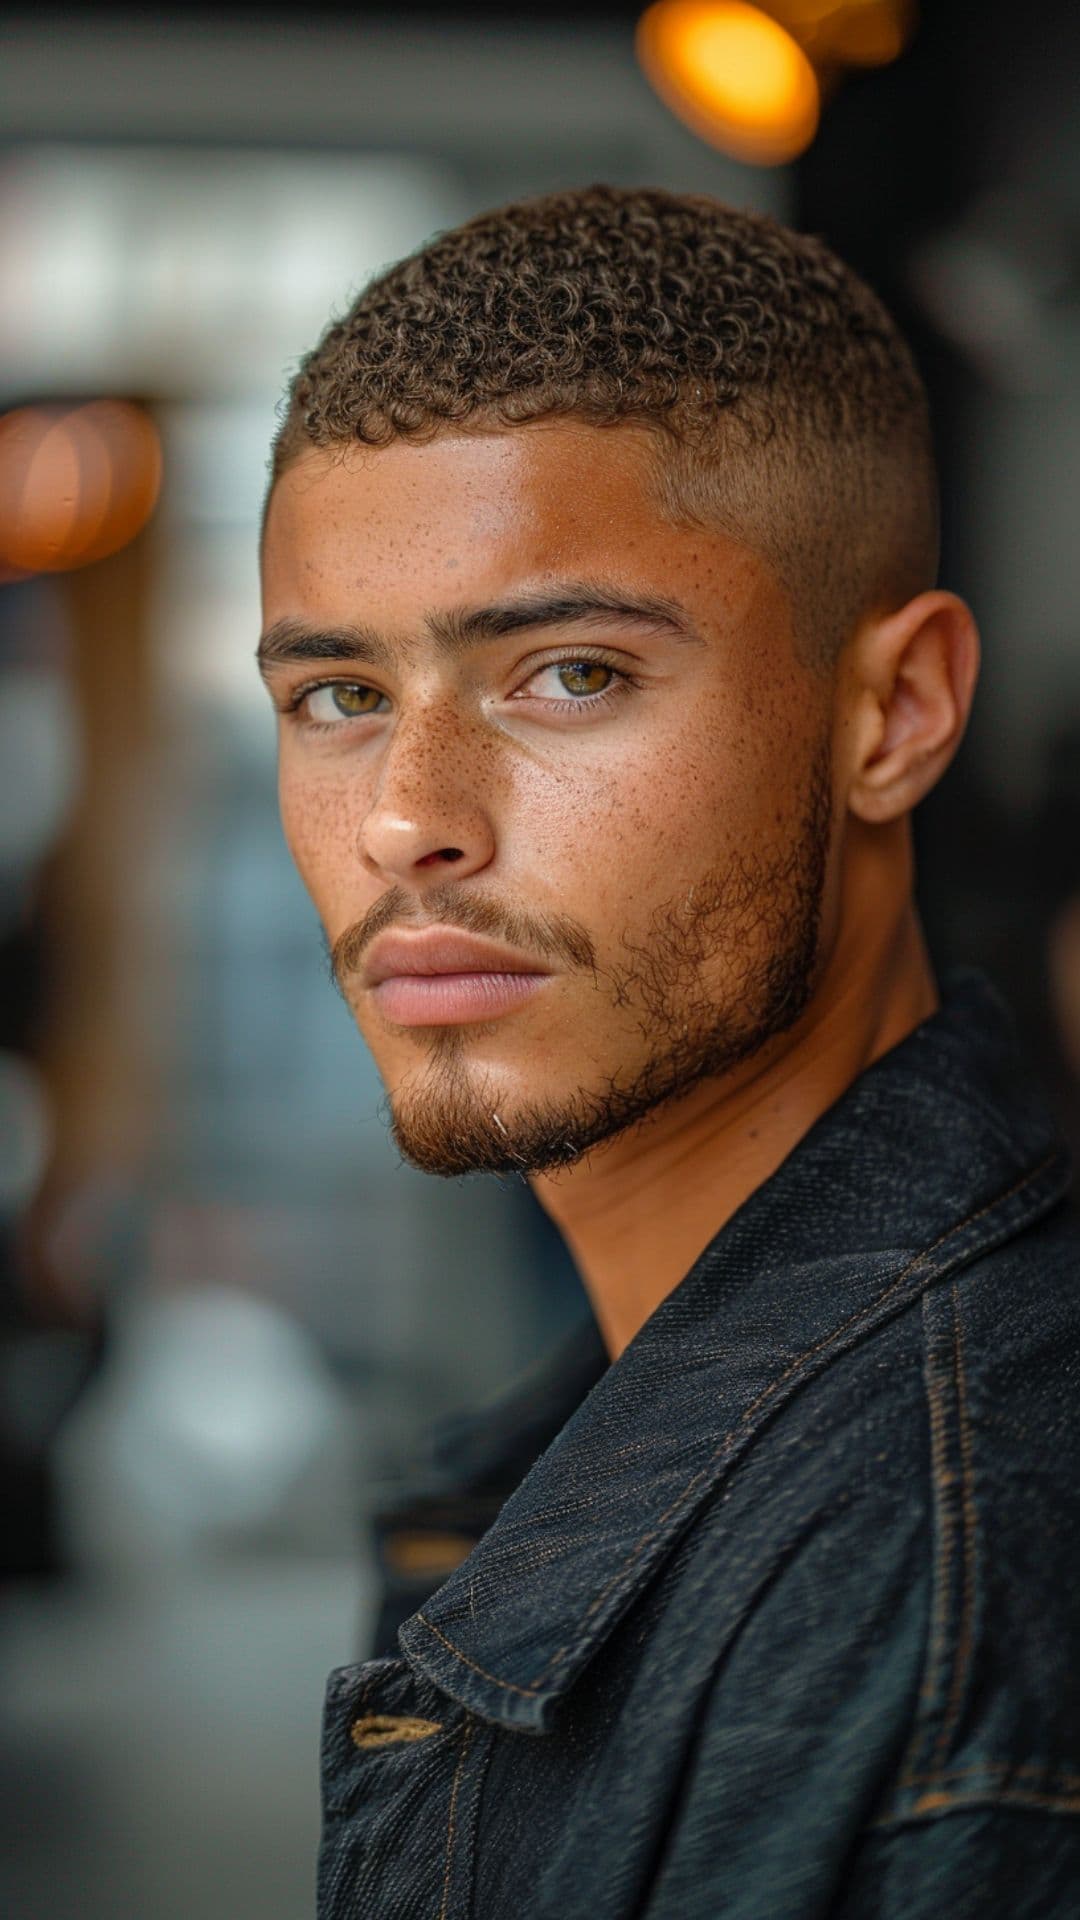 A man modelling a curly buzz cut hairstyle.